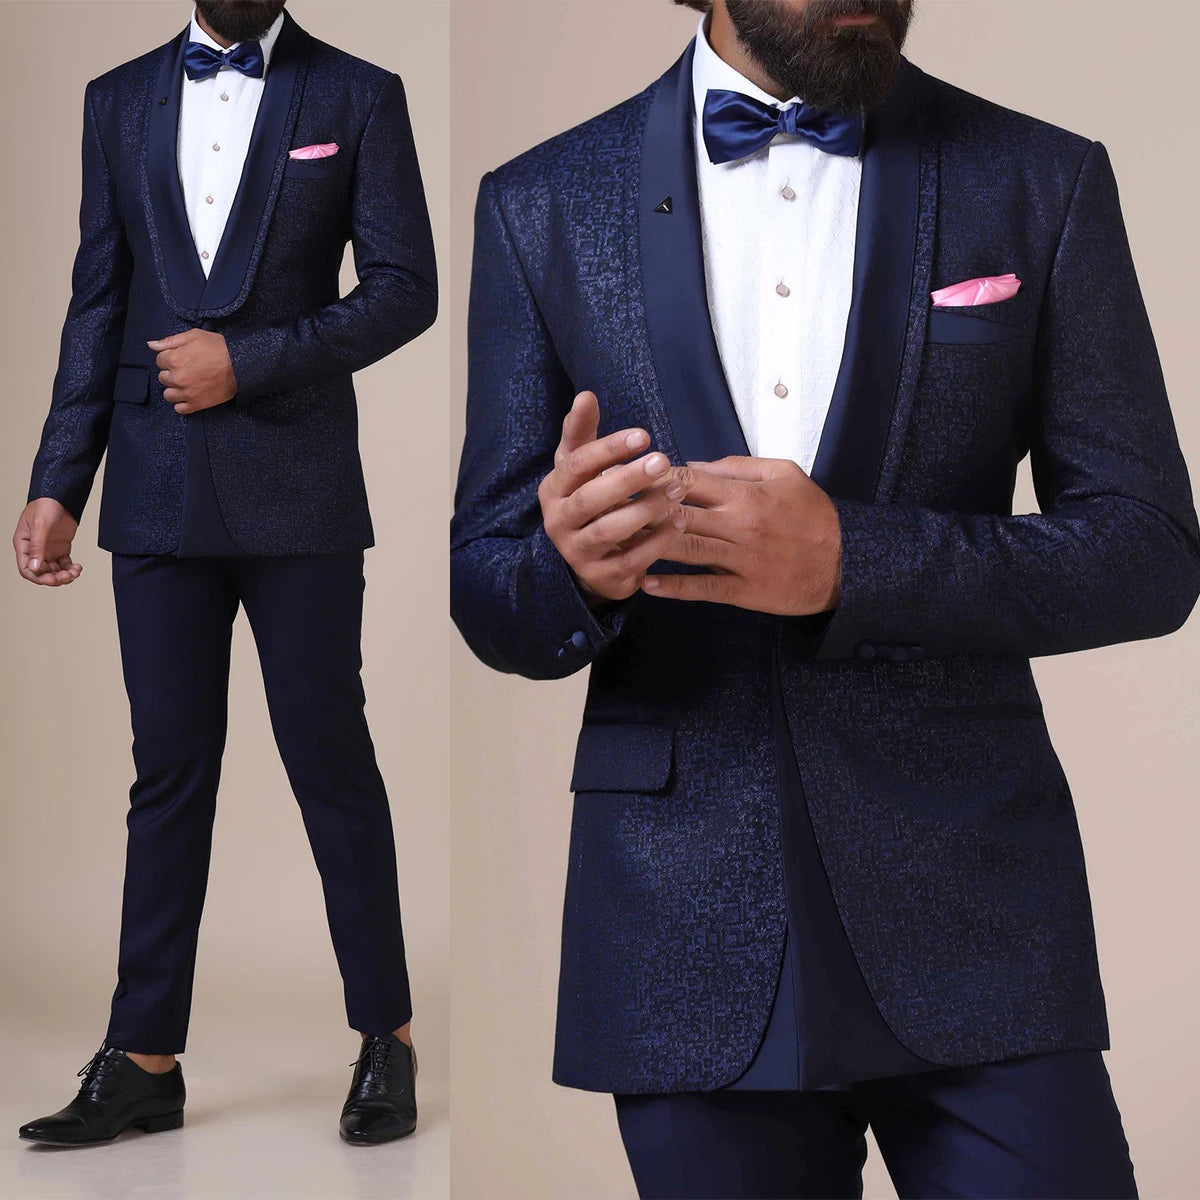 Men's Suits Tailor-Made Spliced 2 Pieces Navy Jacquard Blazer Pants One Button Satin Sheer Lapel Business Wedding Groom Tailored